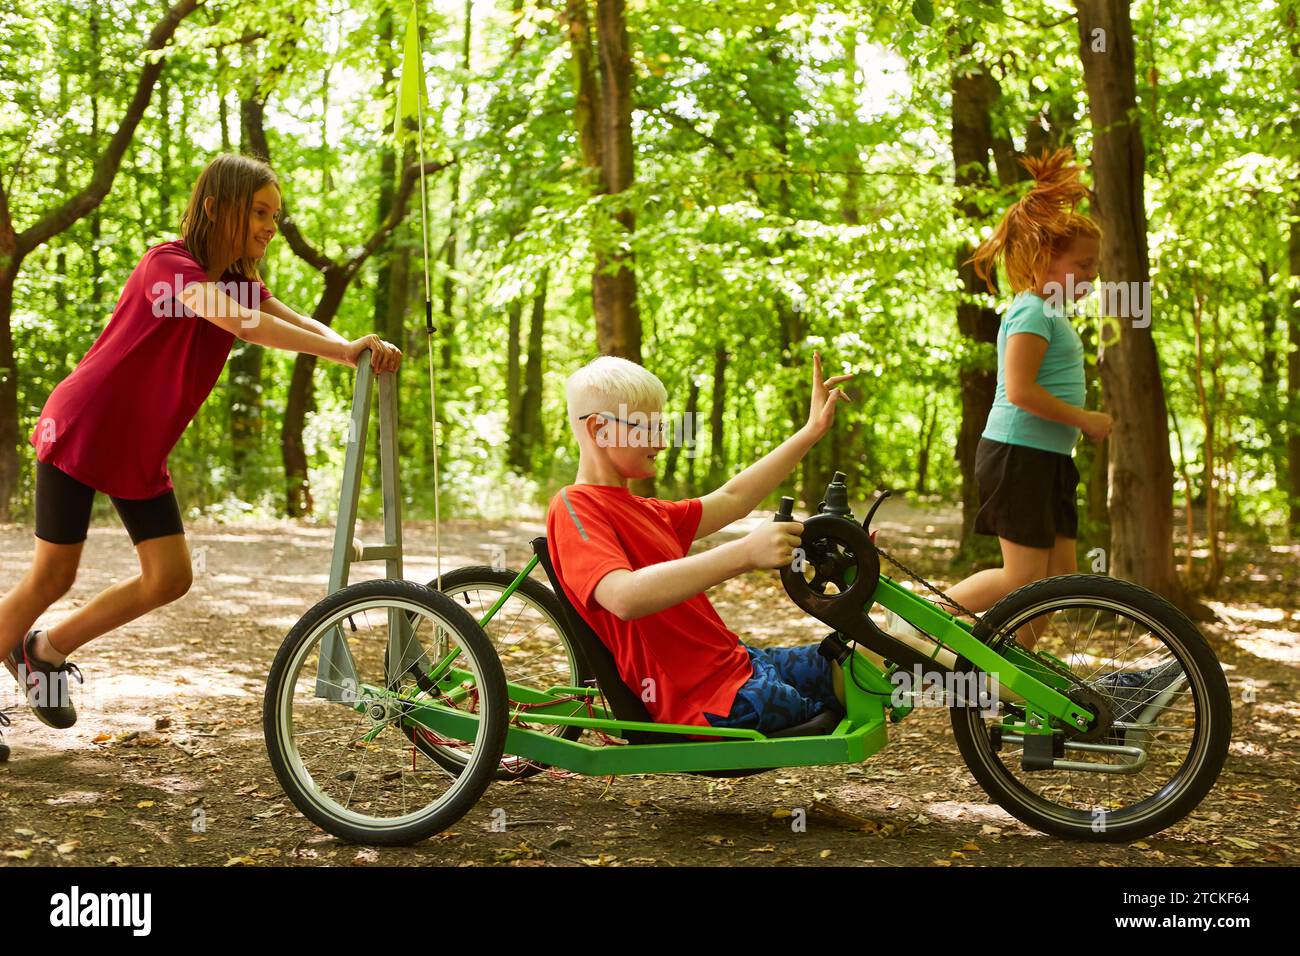 Playful girl pushing disabled boy riding recumbent bike on footpath at forest Stock Photo